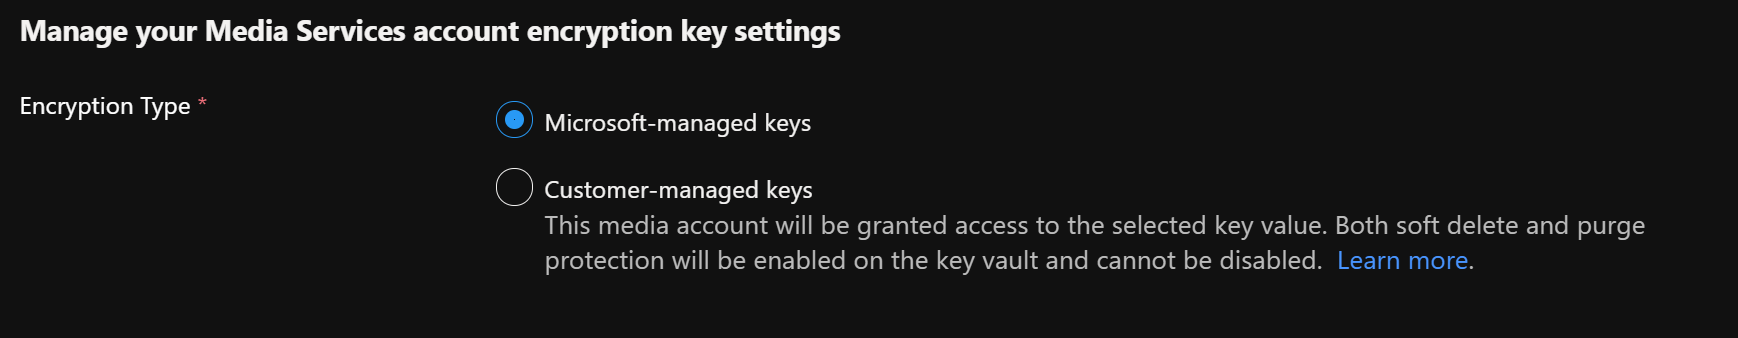 Bring your own keys for account encryption